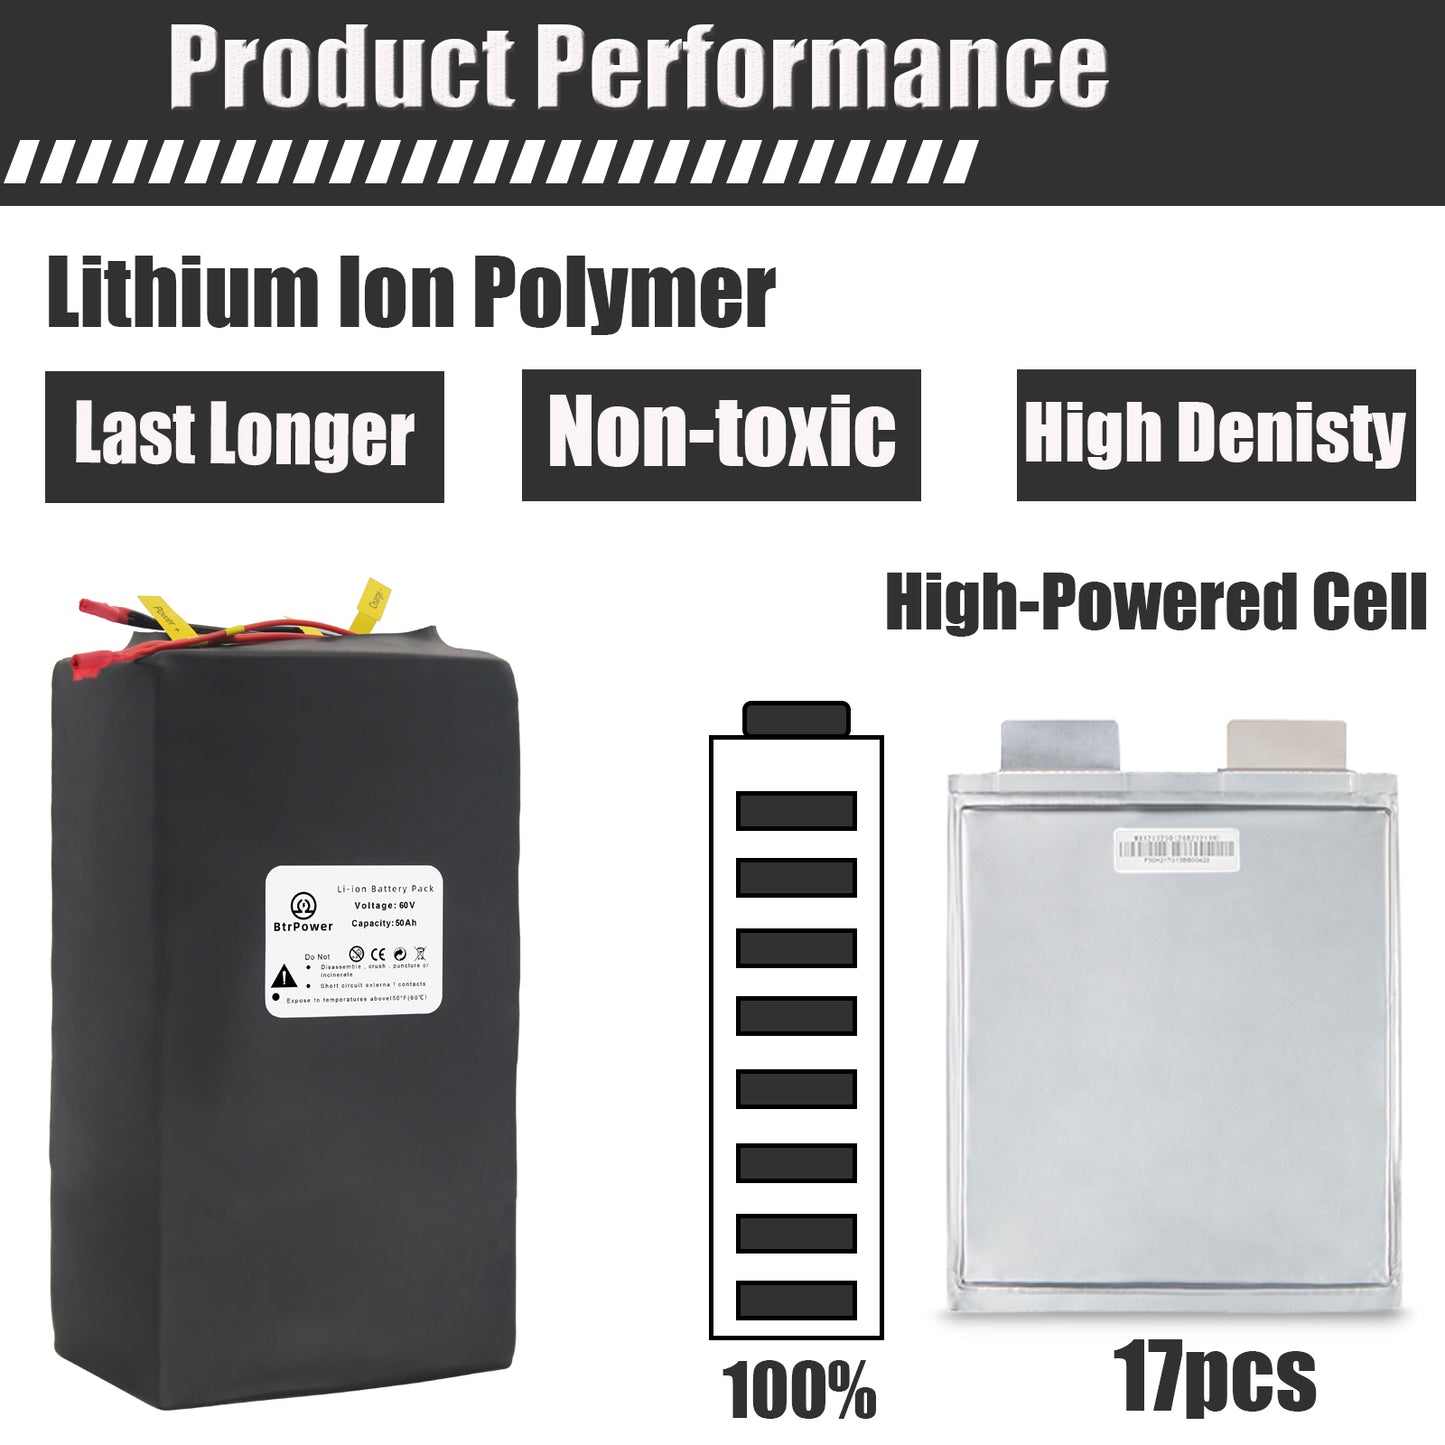 BtrPower 60V 50AH Ebike Battery, Li-ion Battery Pack with 5A Charger,50A BMS